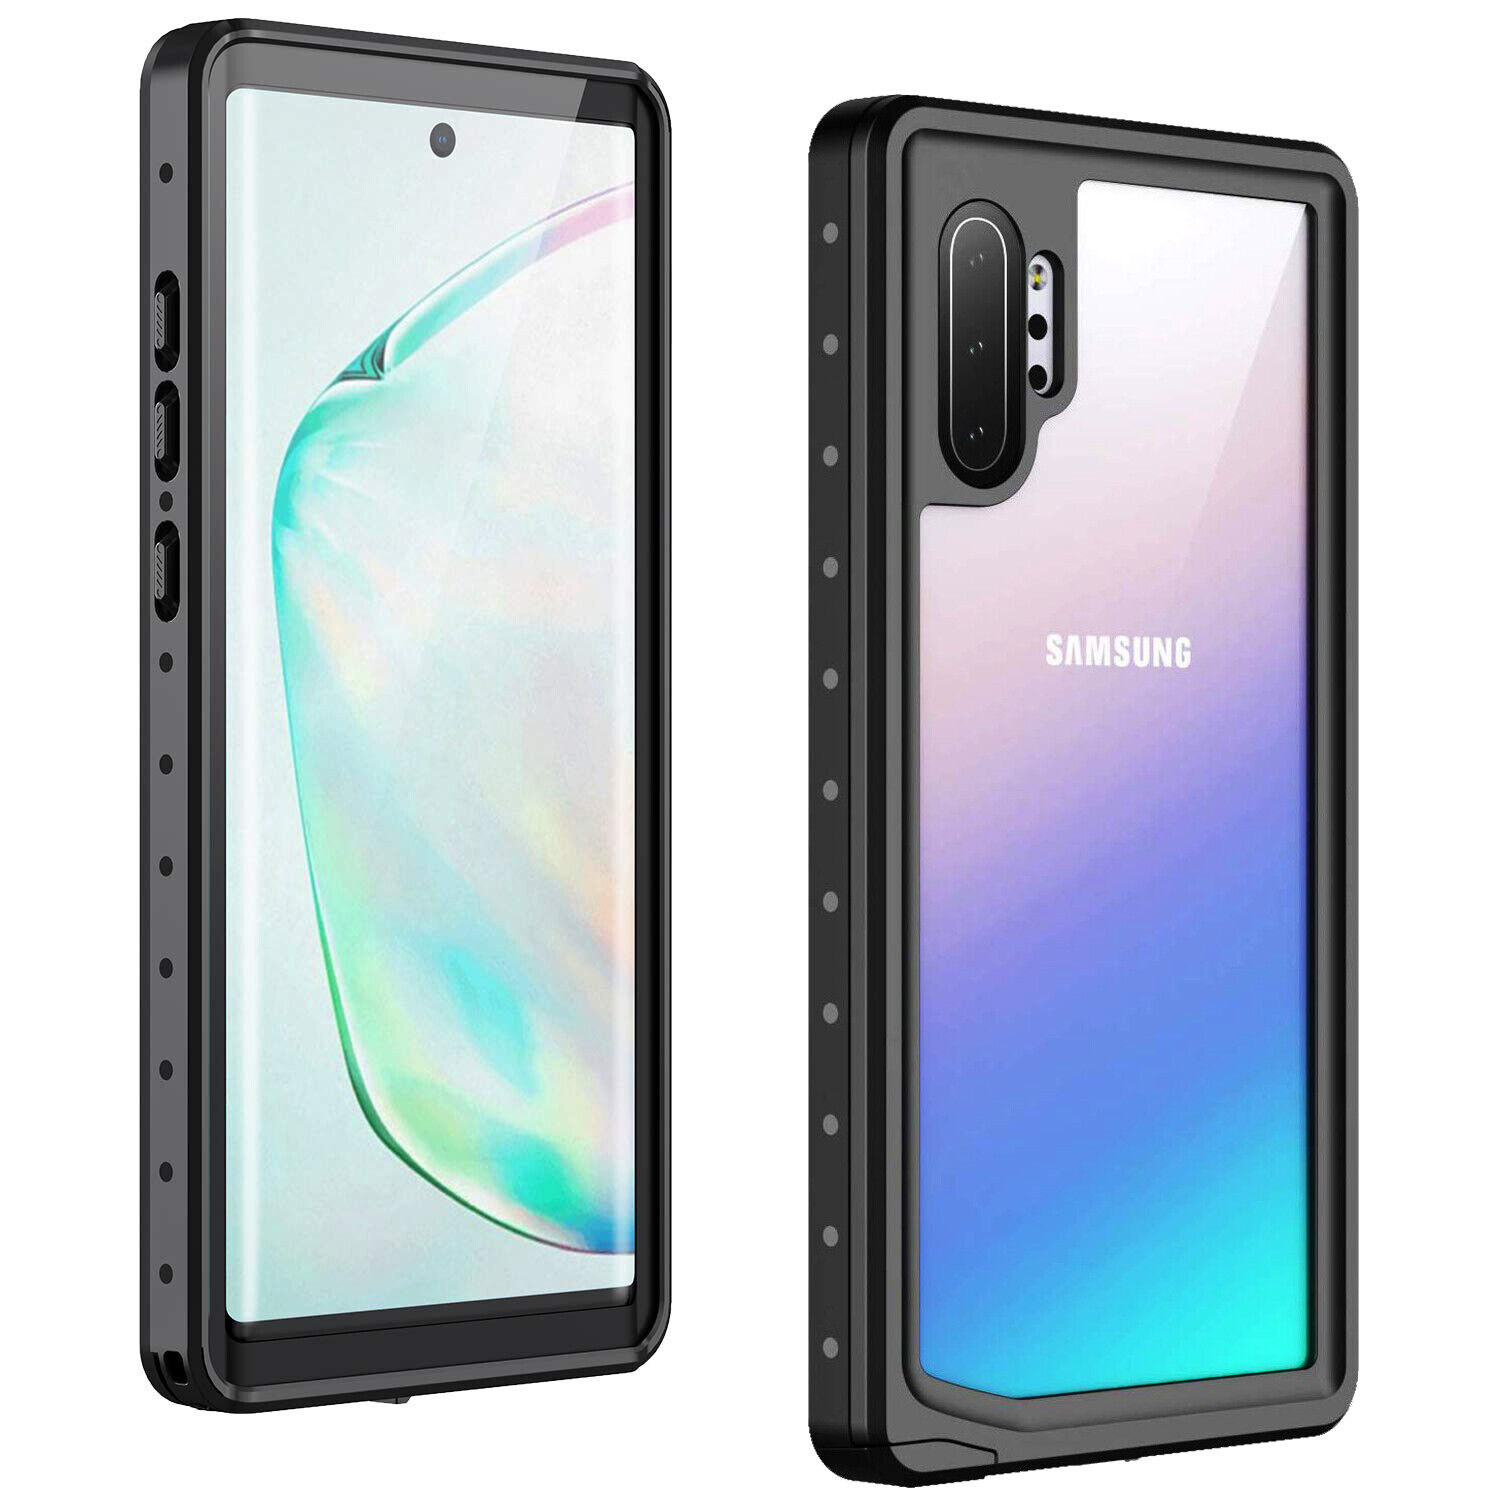 Waterproof Case For Samsung Galaxy Note 10 10+ Plus Heavy Duty Shockproof Cover